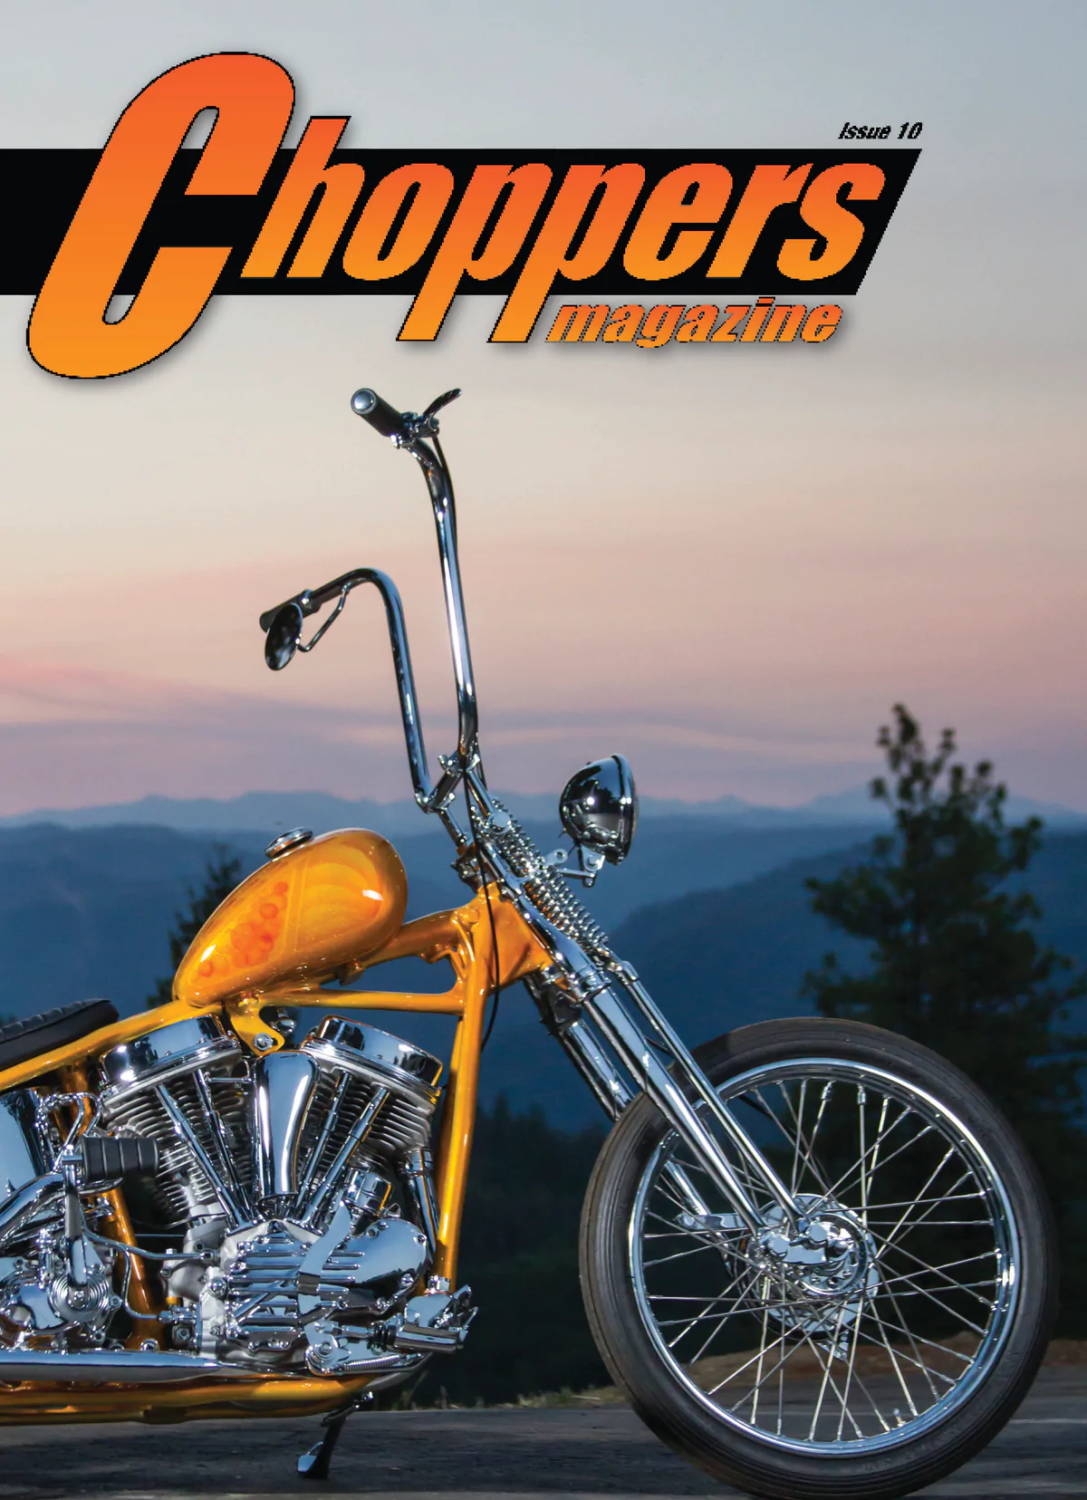 Choppers Magazine Issue 10